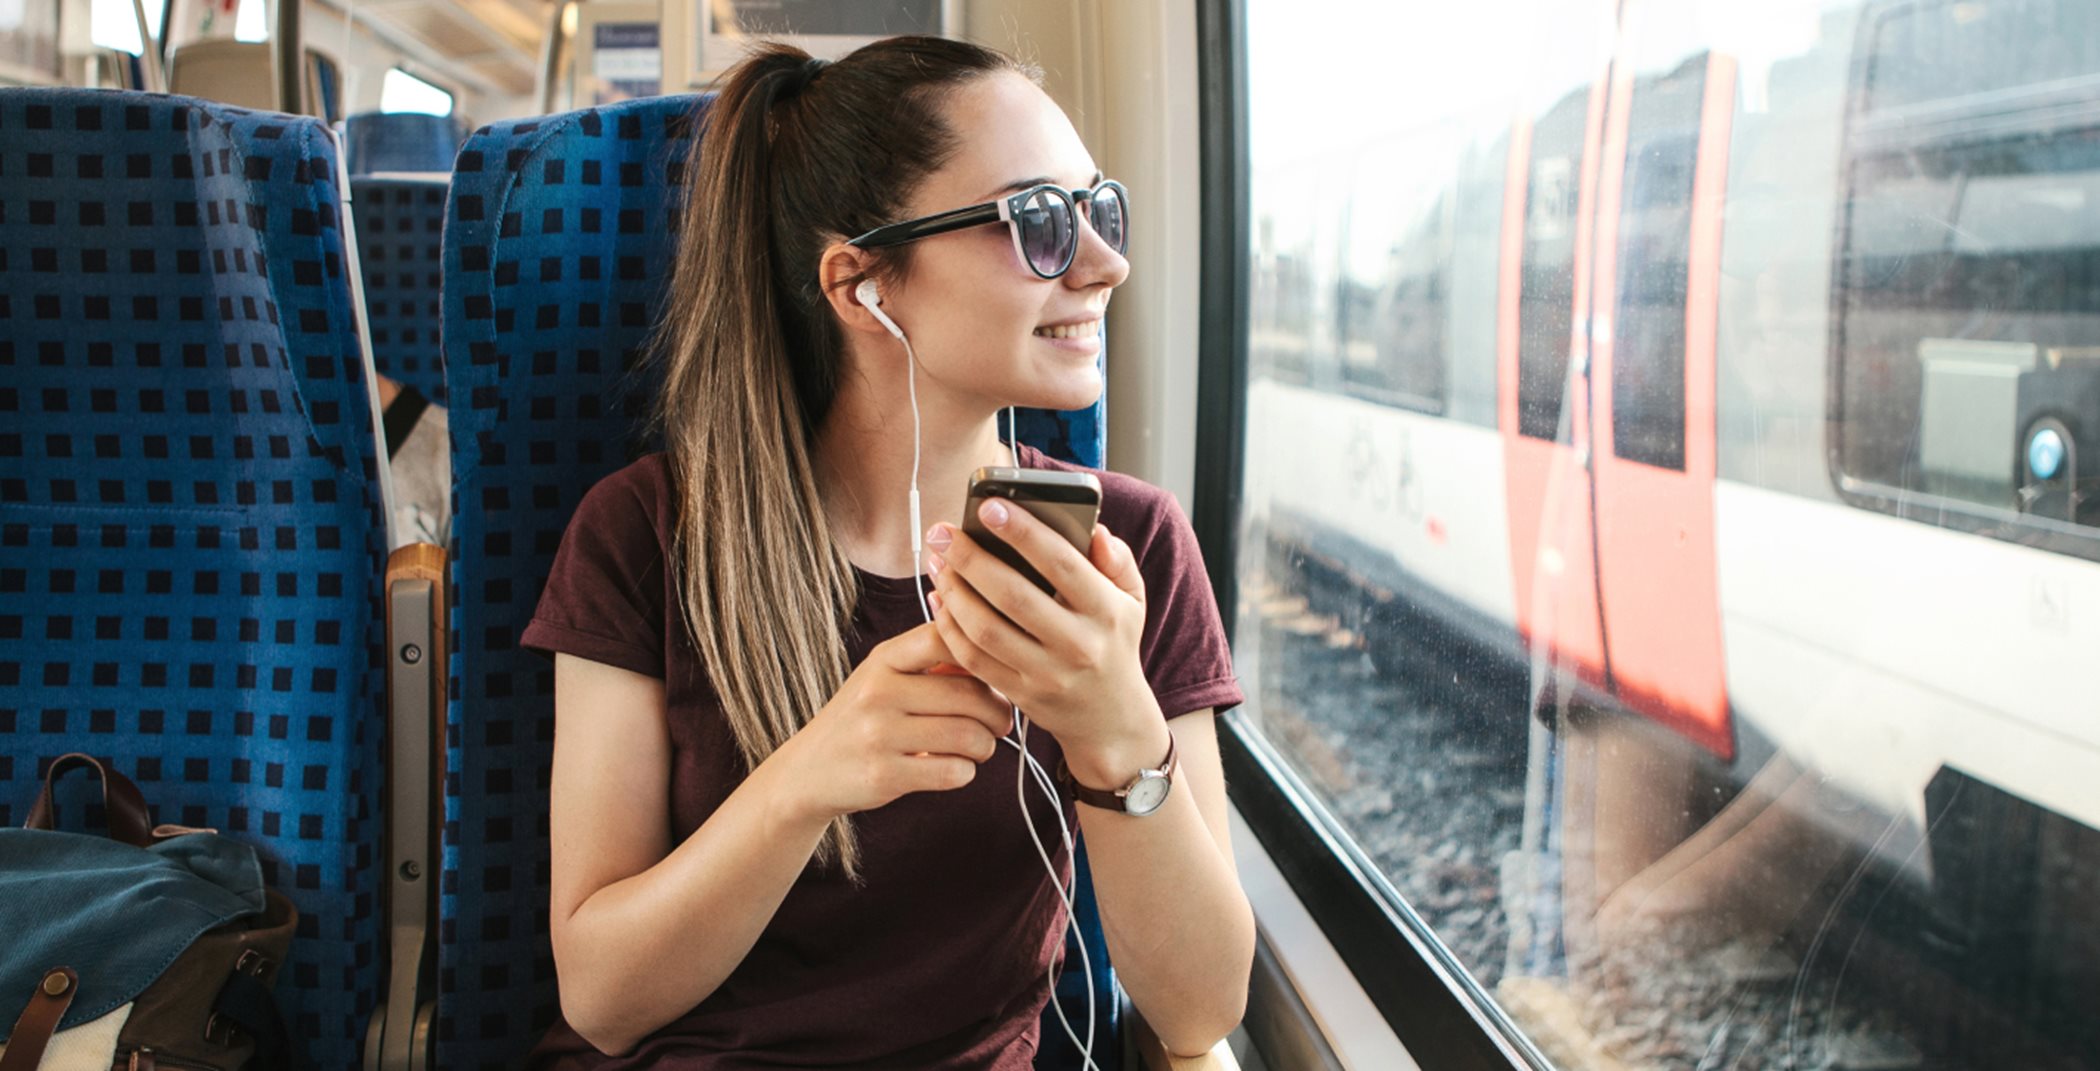 A person sitting on a train listening to their phone with headphones